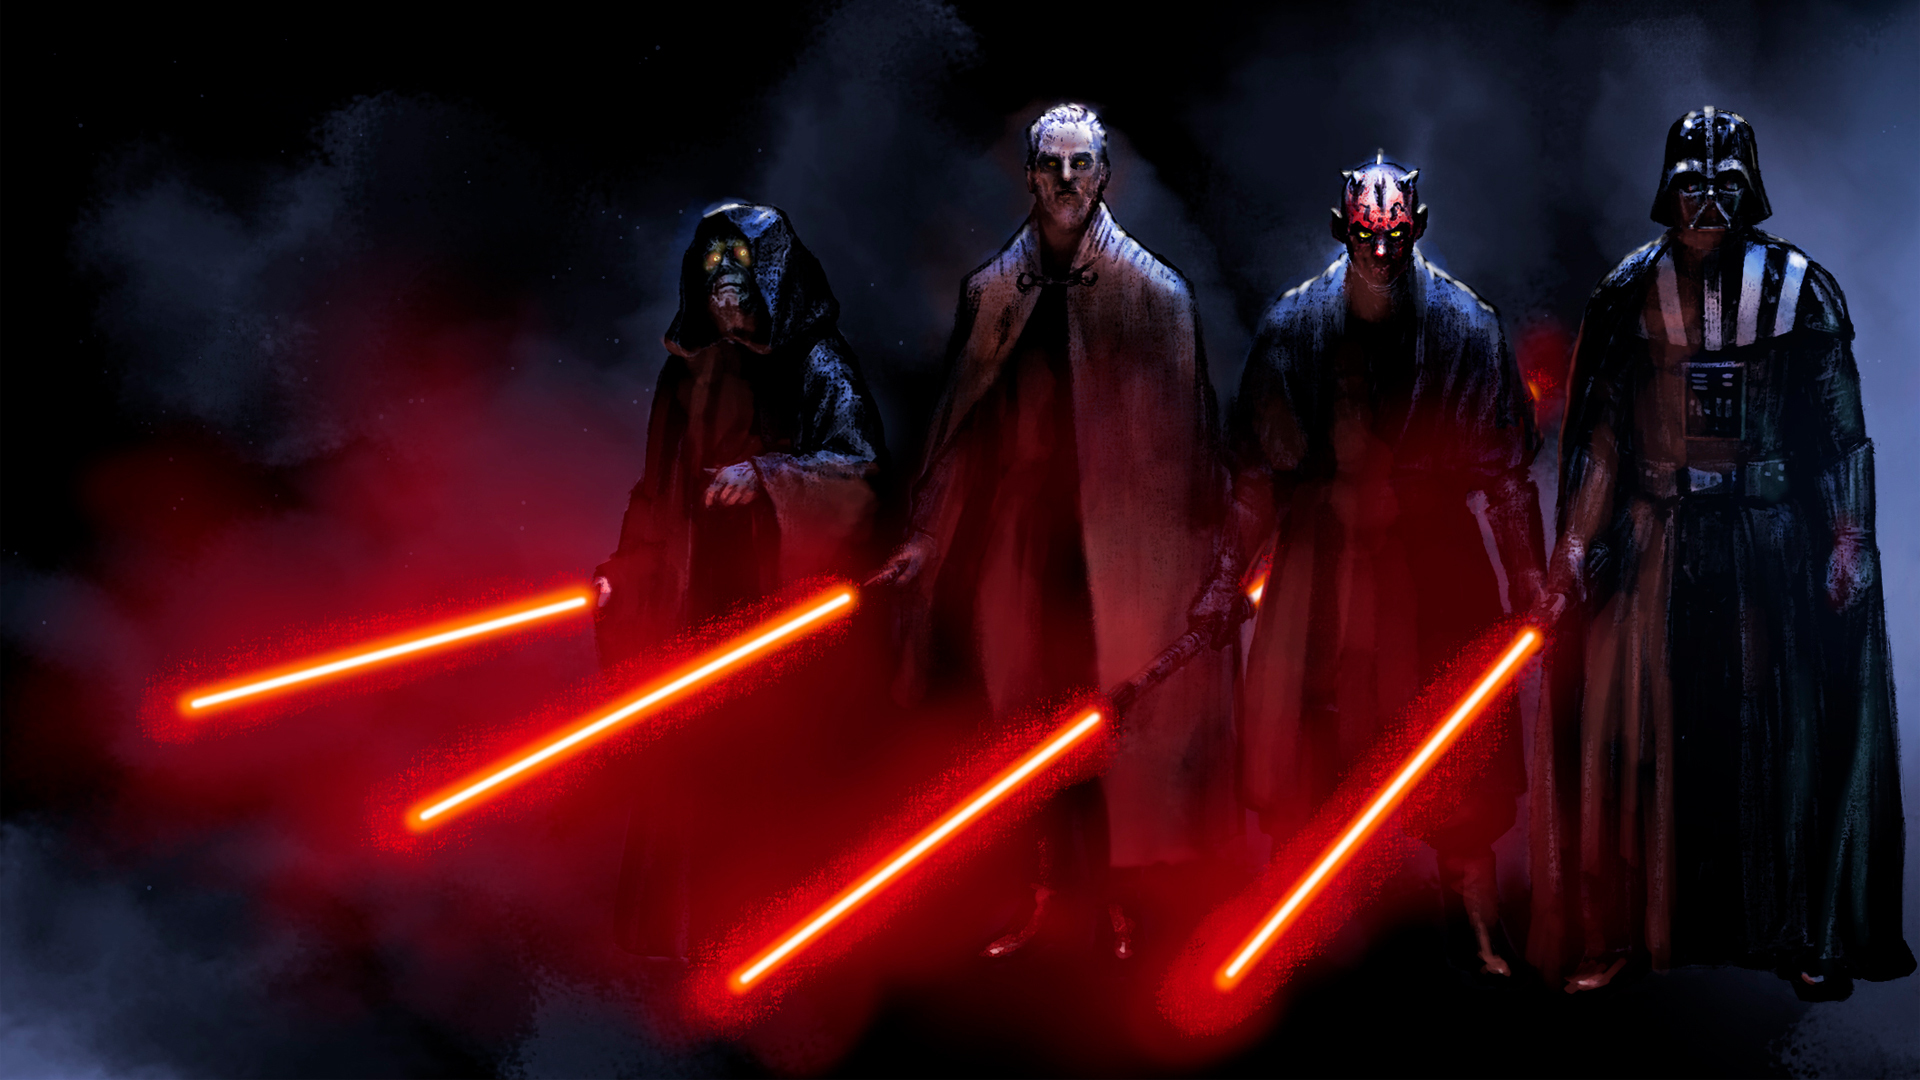 Sith Lords Computer Wallpapers Desktop Backgrounds 1920x1080 ID